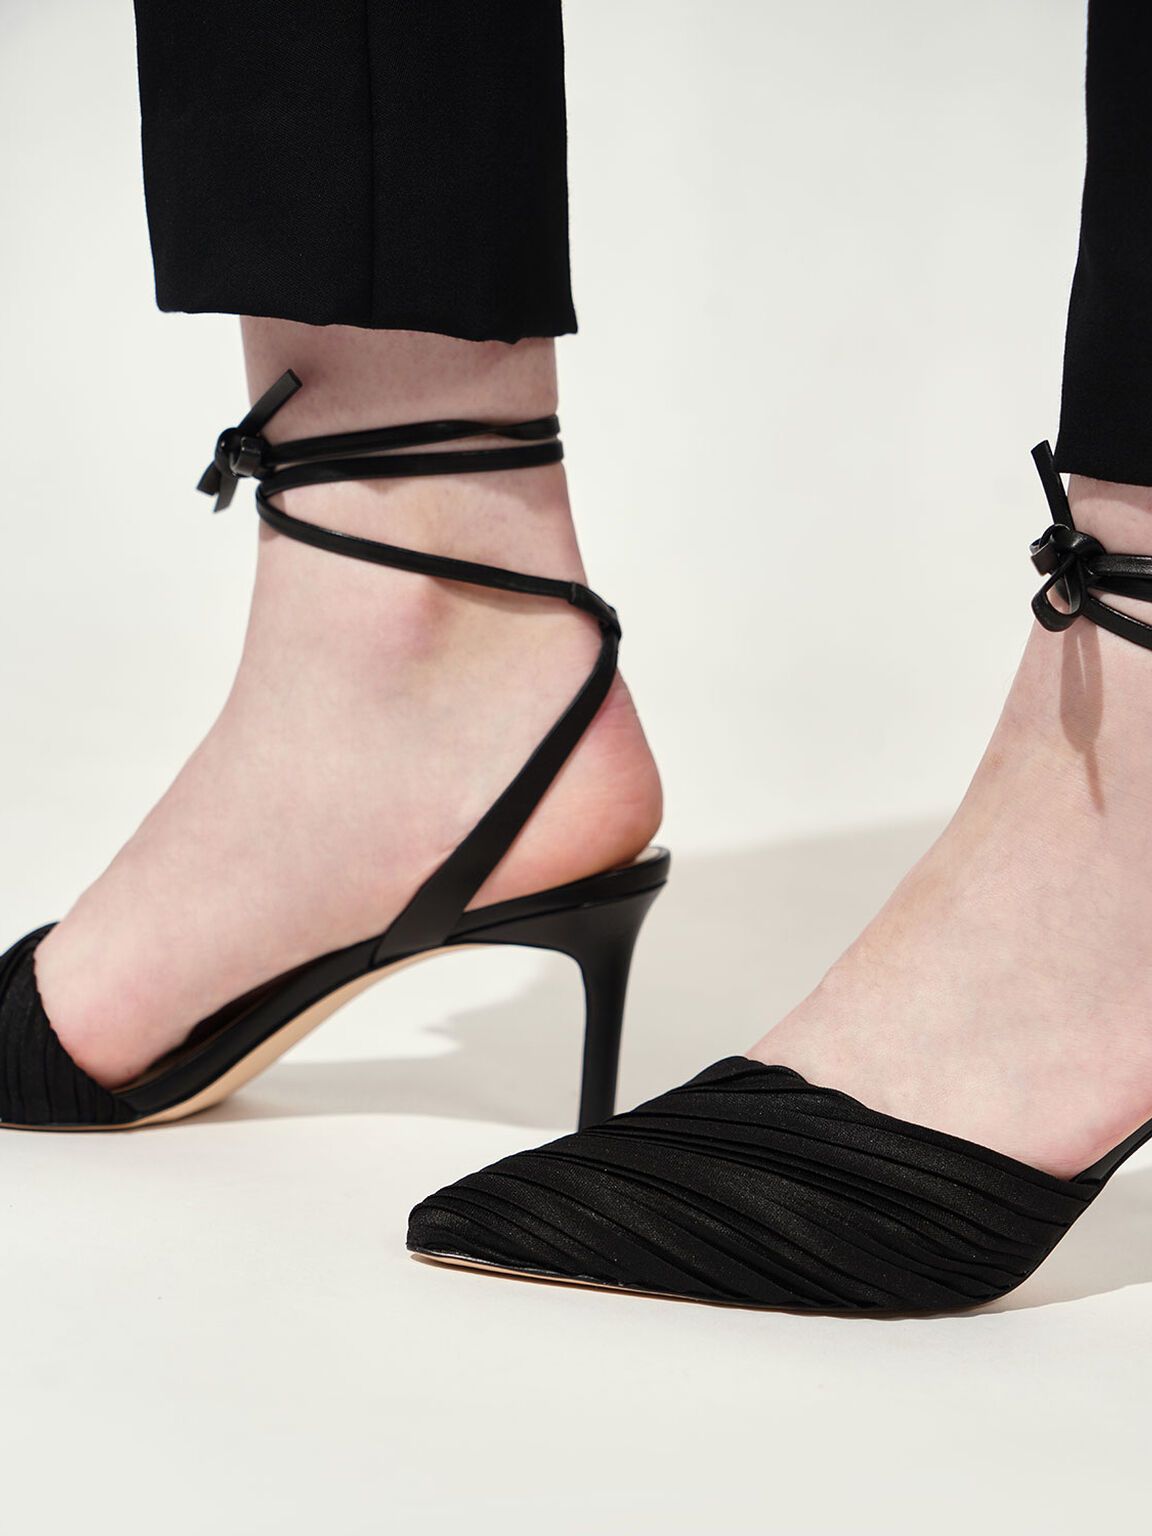 Pleated Ankle-Tie Stiletto Pumps